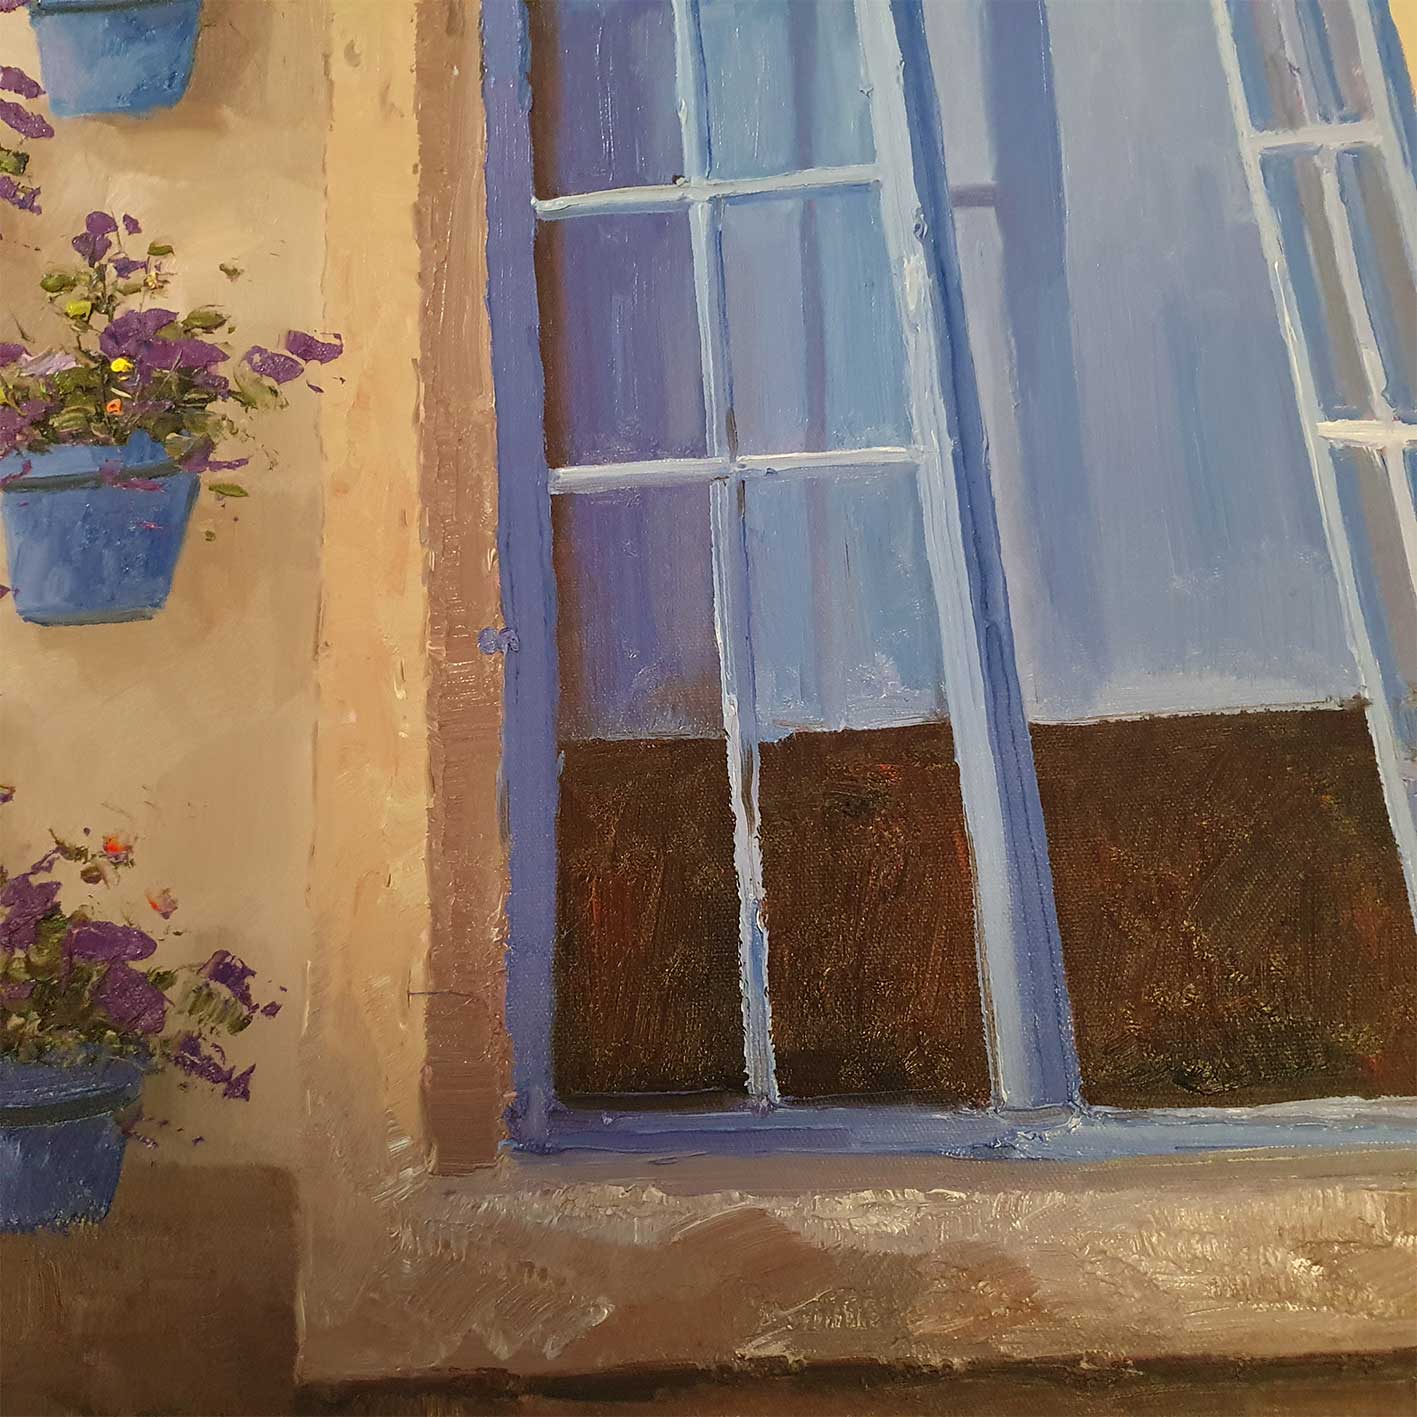 Andalusia Windows Painting 80x100 cm